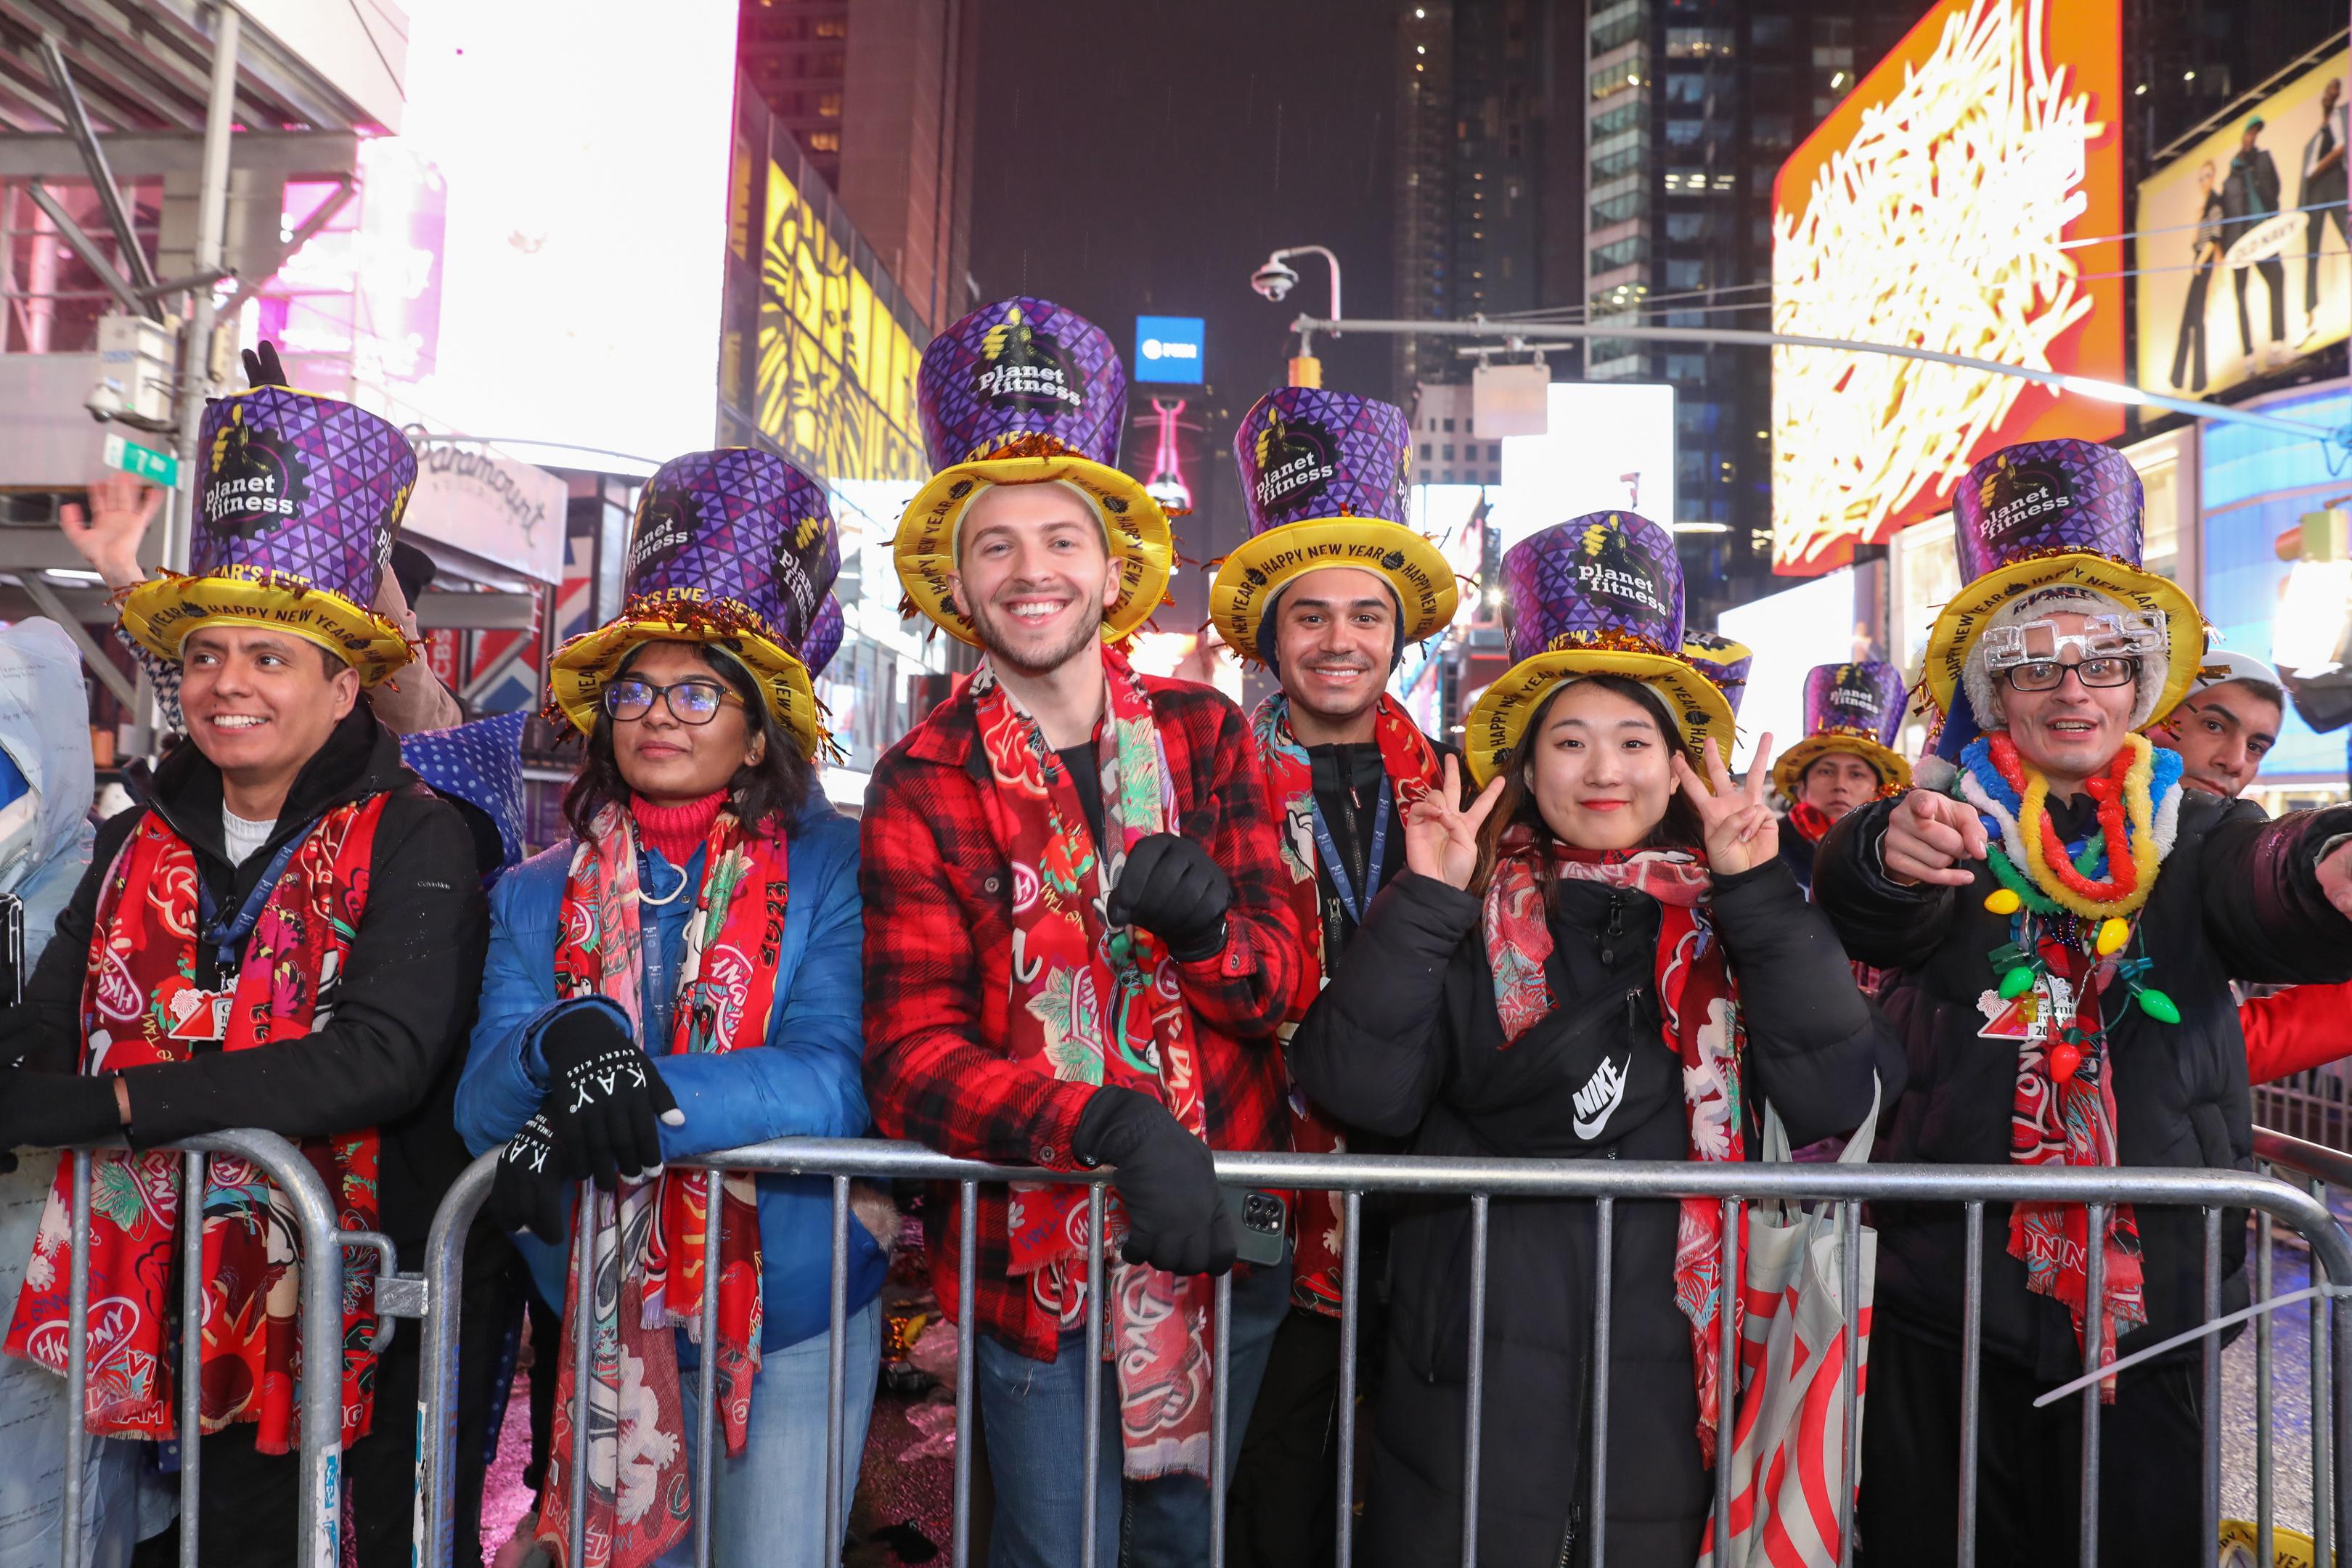 To send love and warmth to revellers at New York Times Square New Year's Eve countdown on December 31, 2022 (New York time), Hong Kong fashion designer Vivienne Tam has designed a special limited edition scarf that incorporates elements of Hong Kong and the New Year.